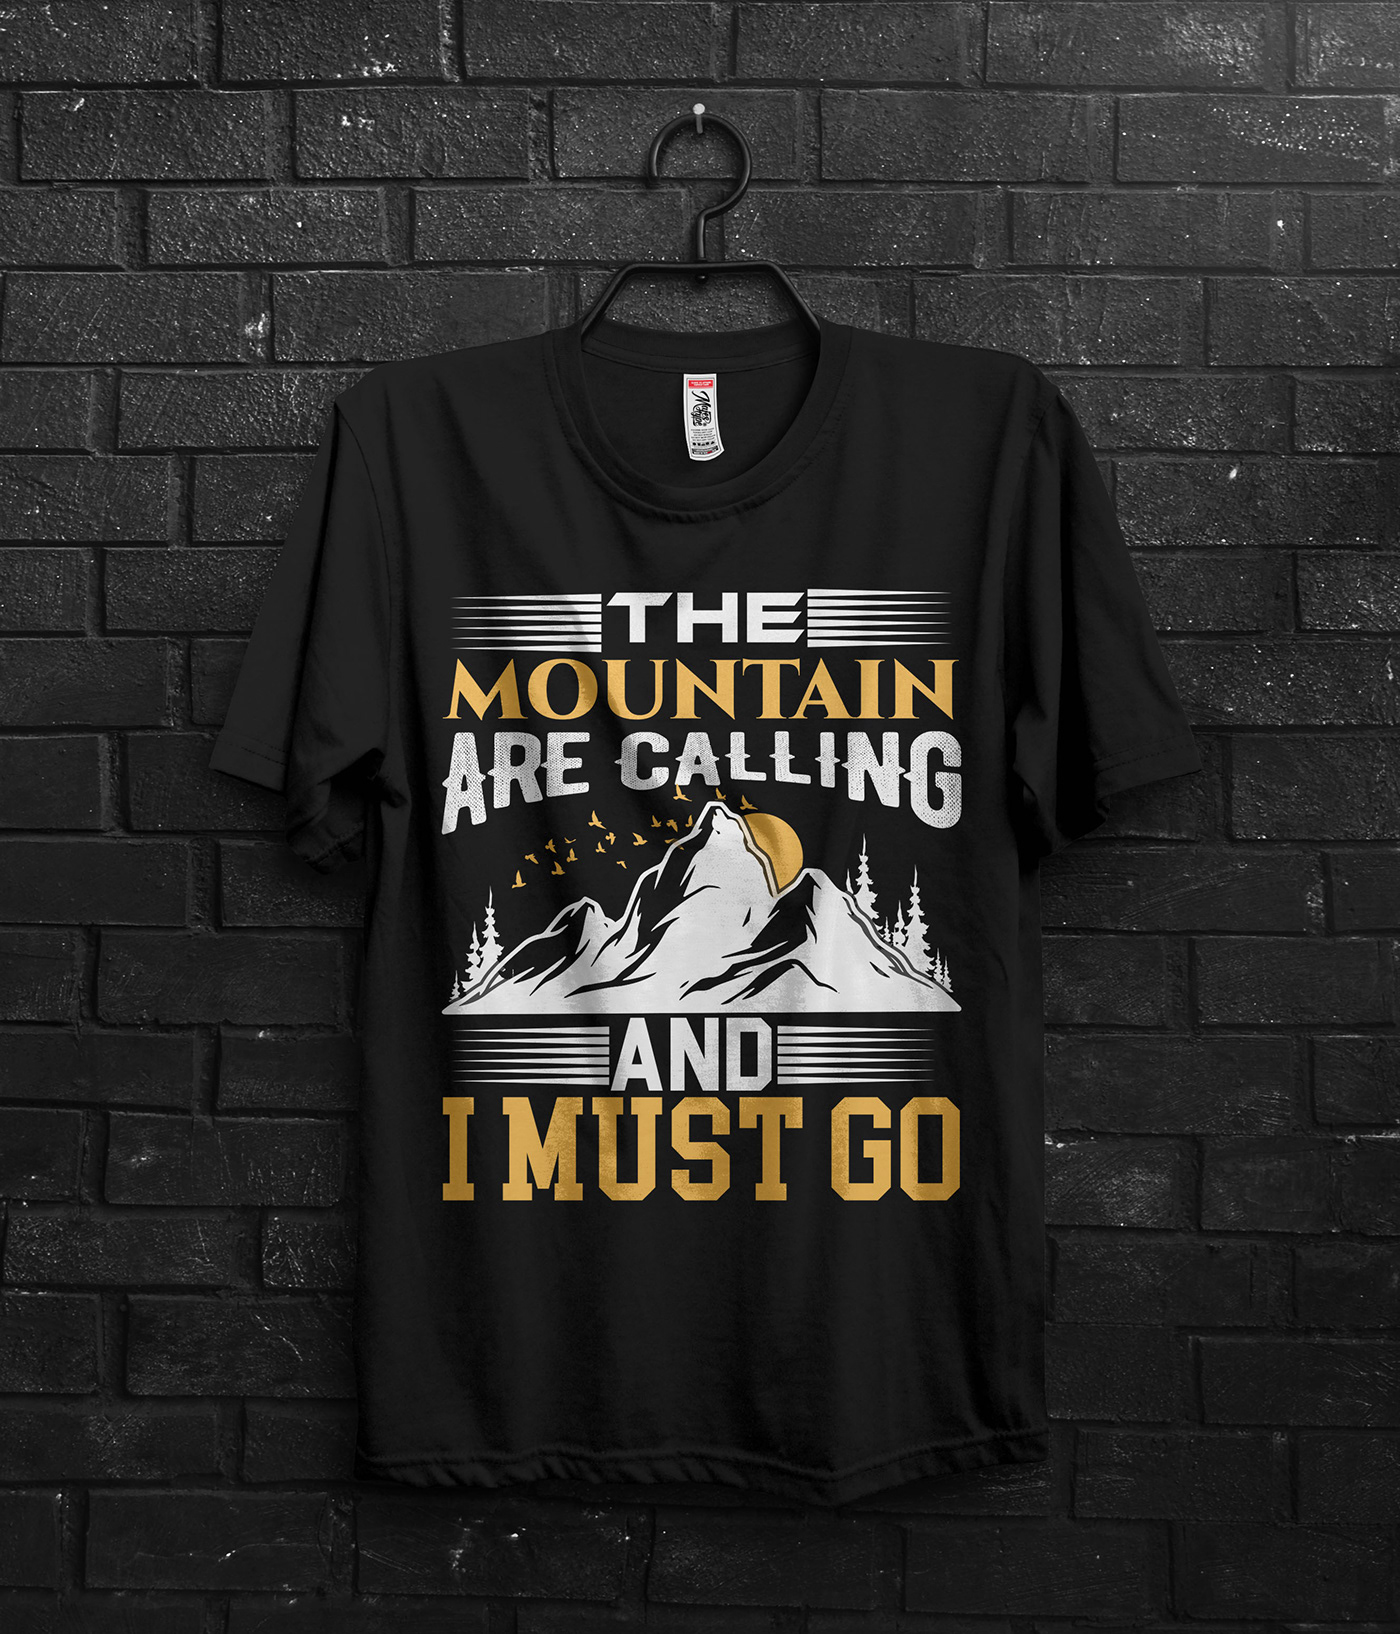 t-shirt black graphic tee mountains sunset adventure Outdoor Clothing design typography  